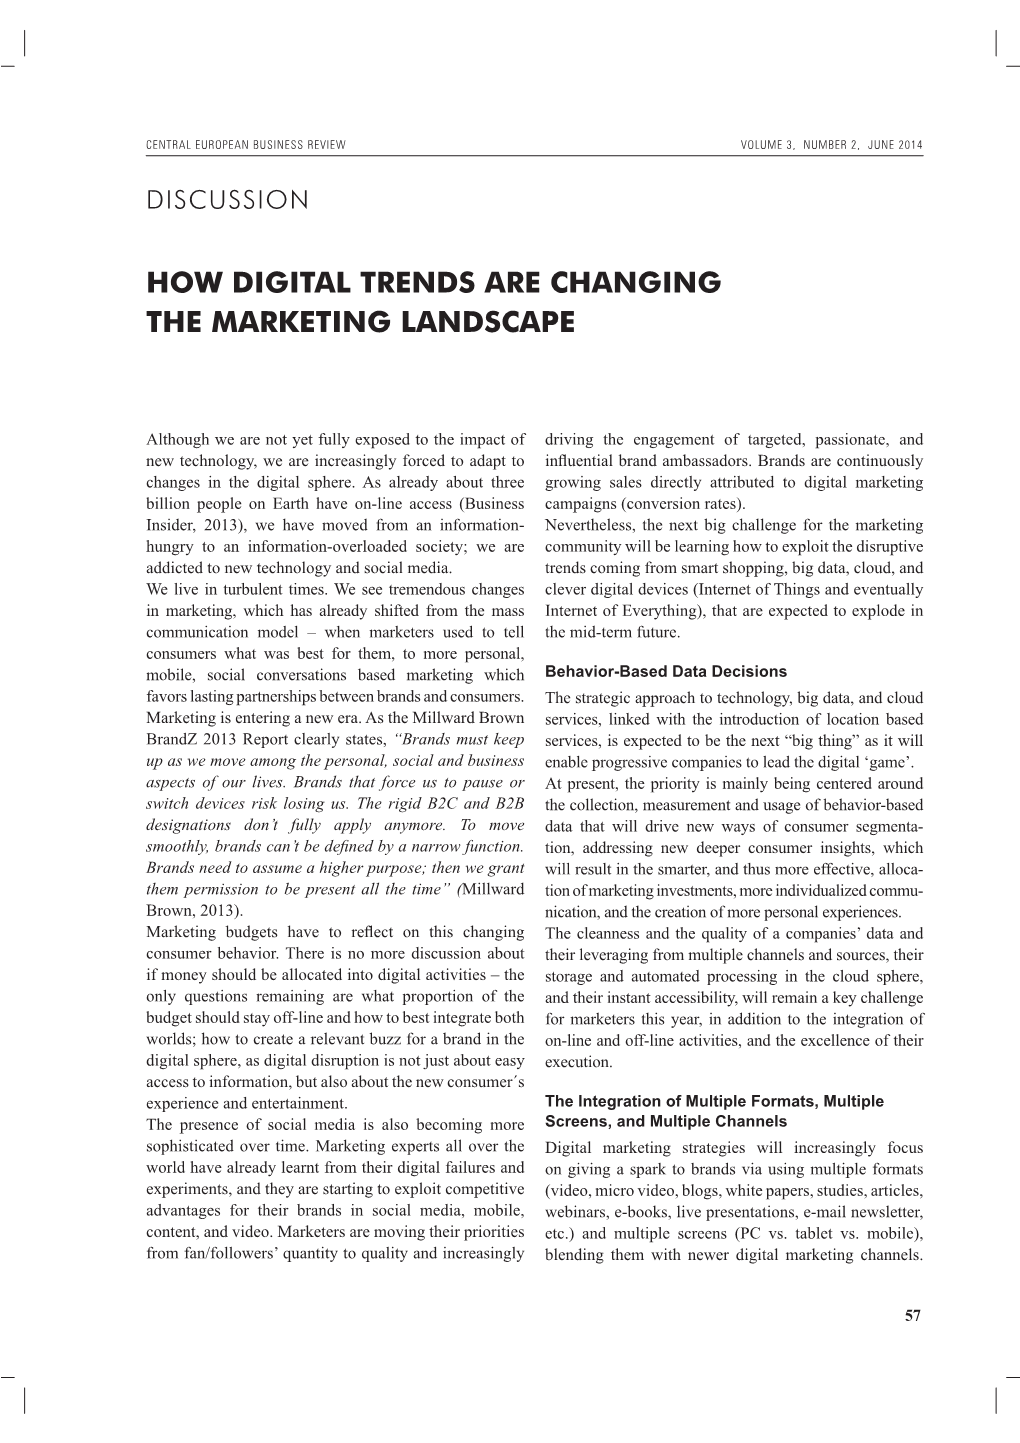 How Digital Trends Are Changing the Marketing Landscape